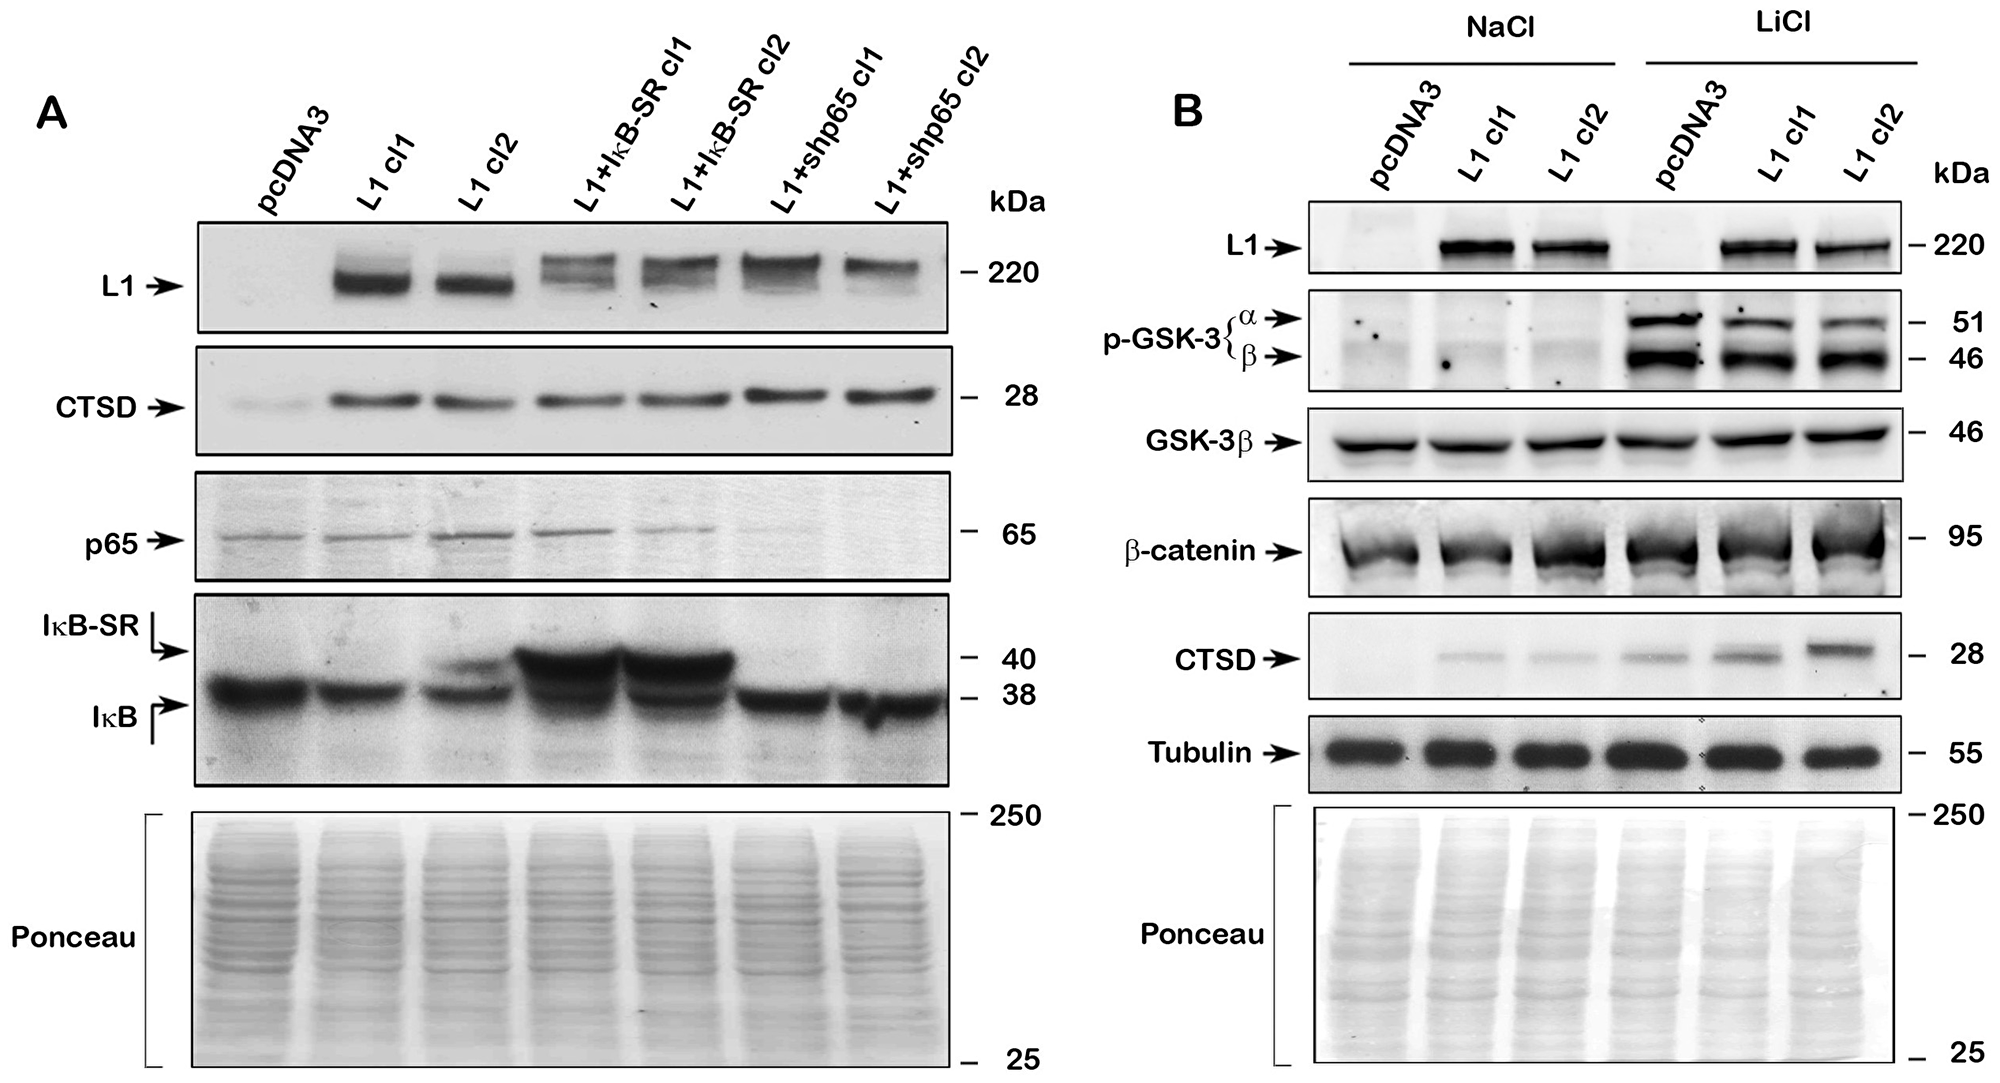 Regulation of CTSD expression by L1 does not involve NF-κB but is affected by Wnt/β-catenin signaling.